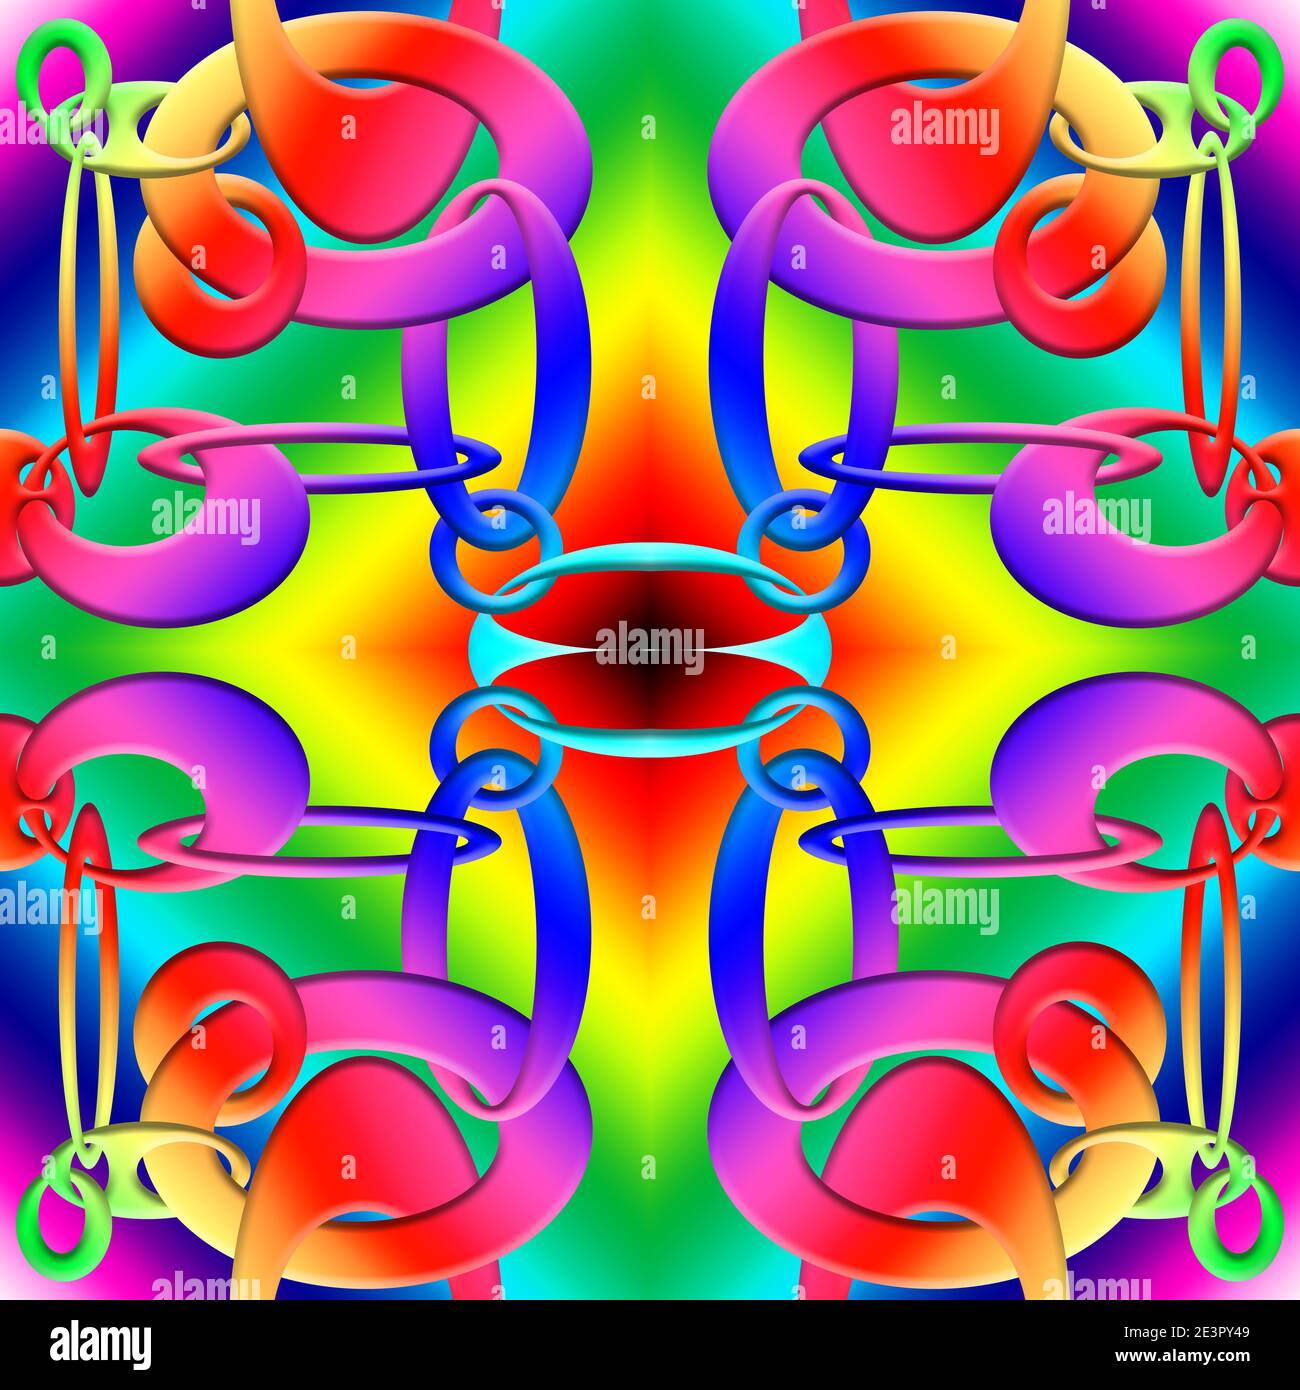 3D graphic illustration - seamless repeating rainbow colours pattern Stock Photo